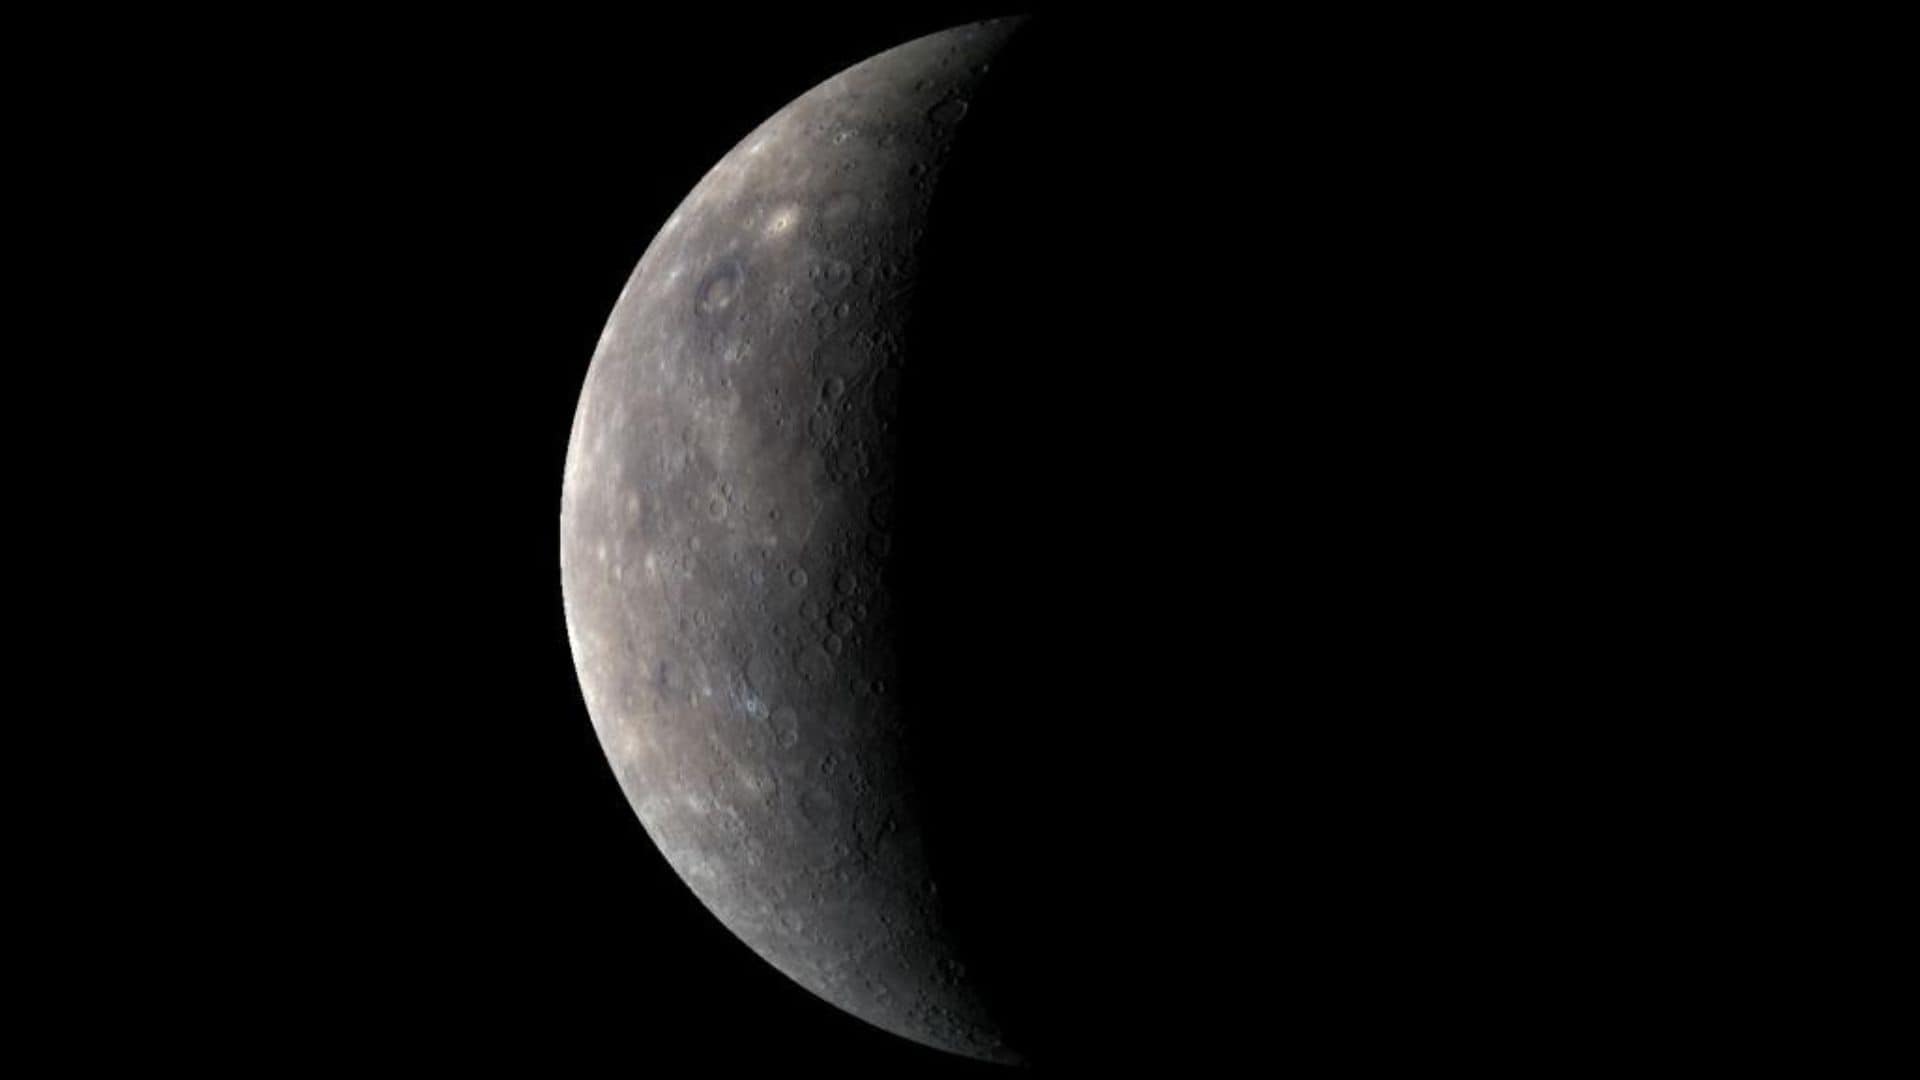 NASA's MESSENGER spacecraft captured waxing crescent Mercury during its close flyby on September 29, 2009